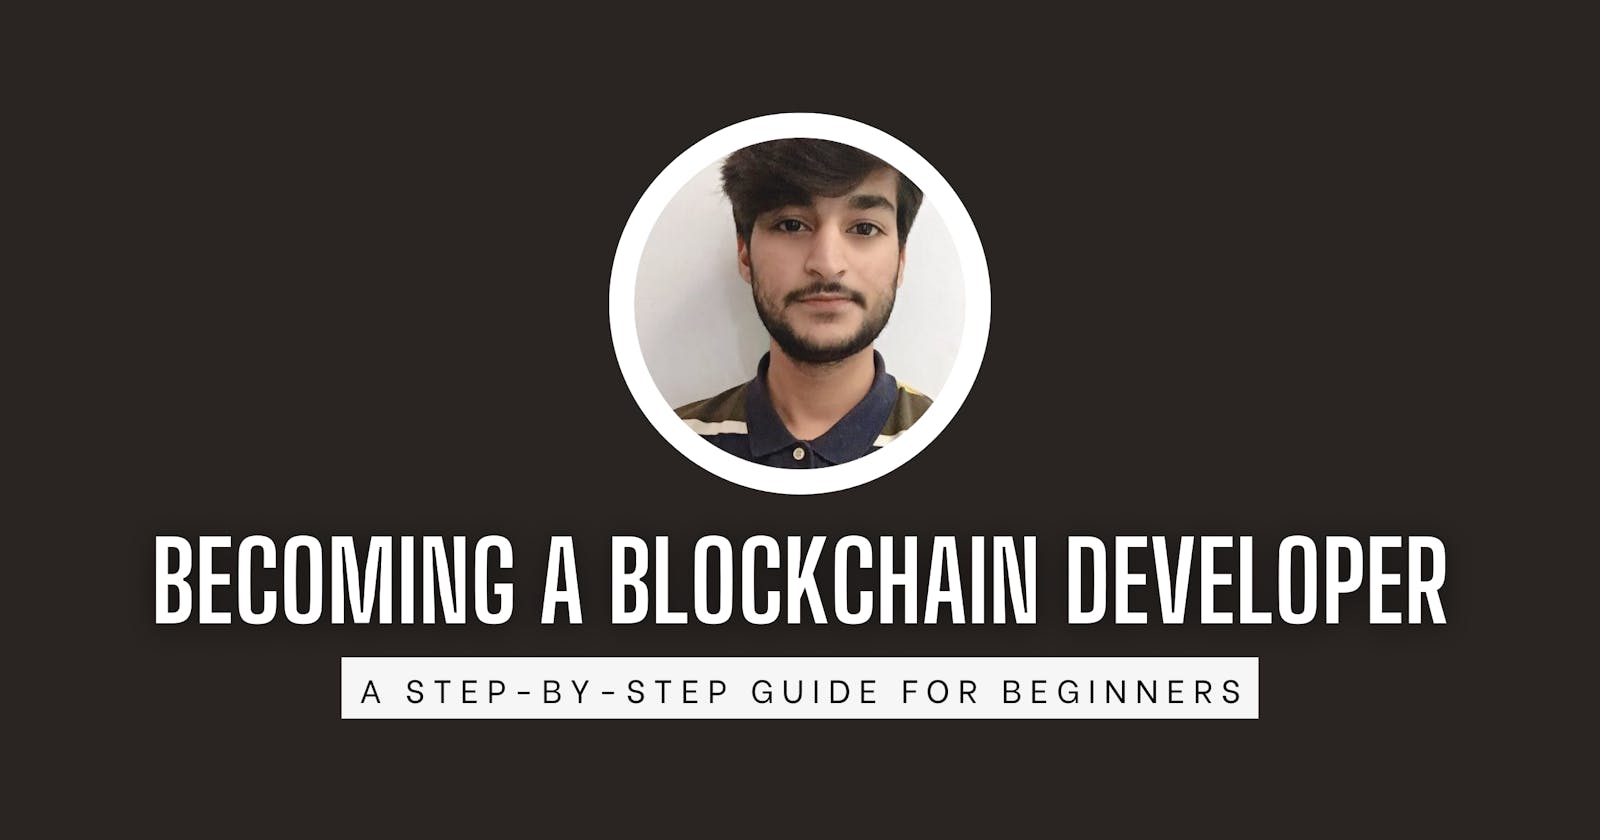 Becoming a Blockchain Developer: A Step-by-Step Guide for Beginners